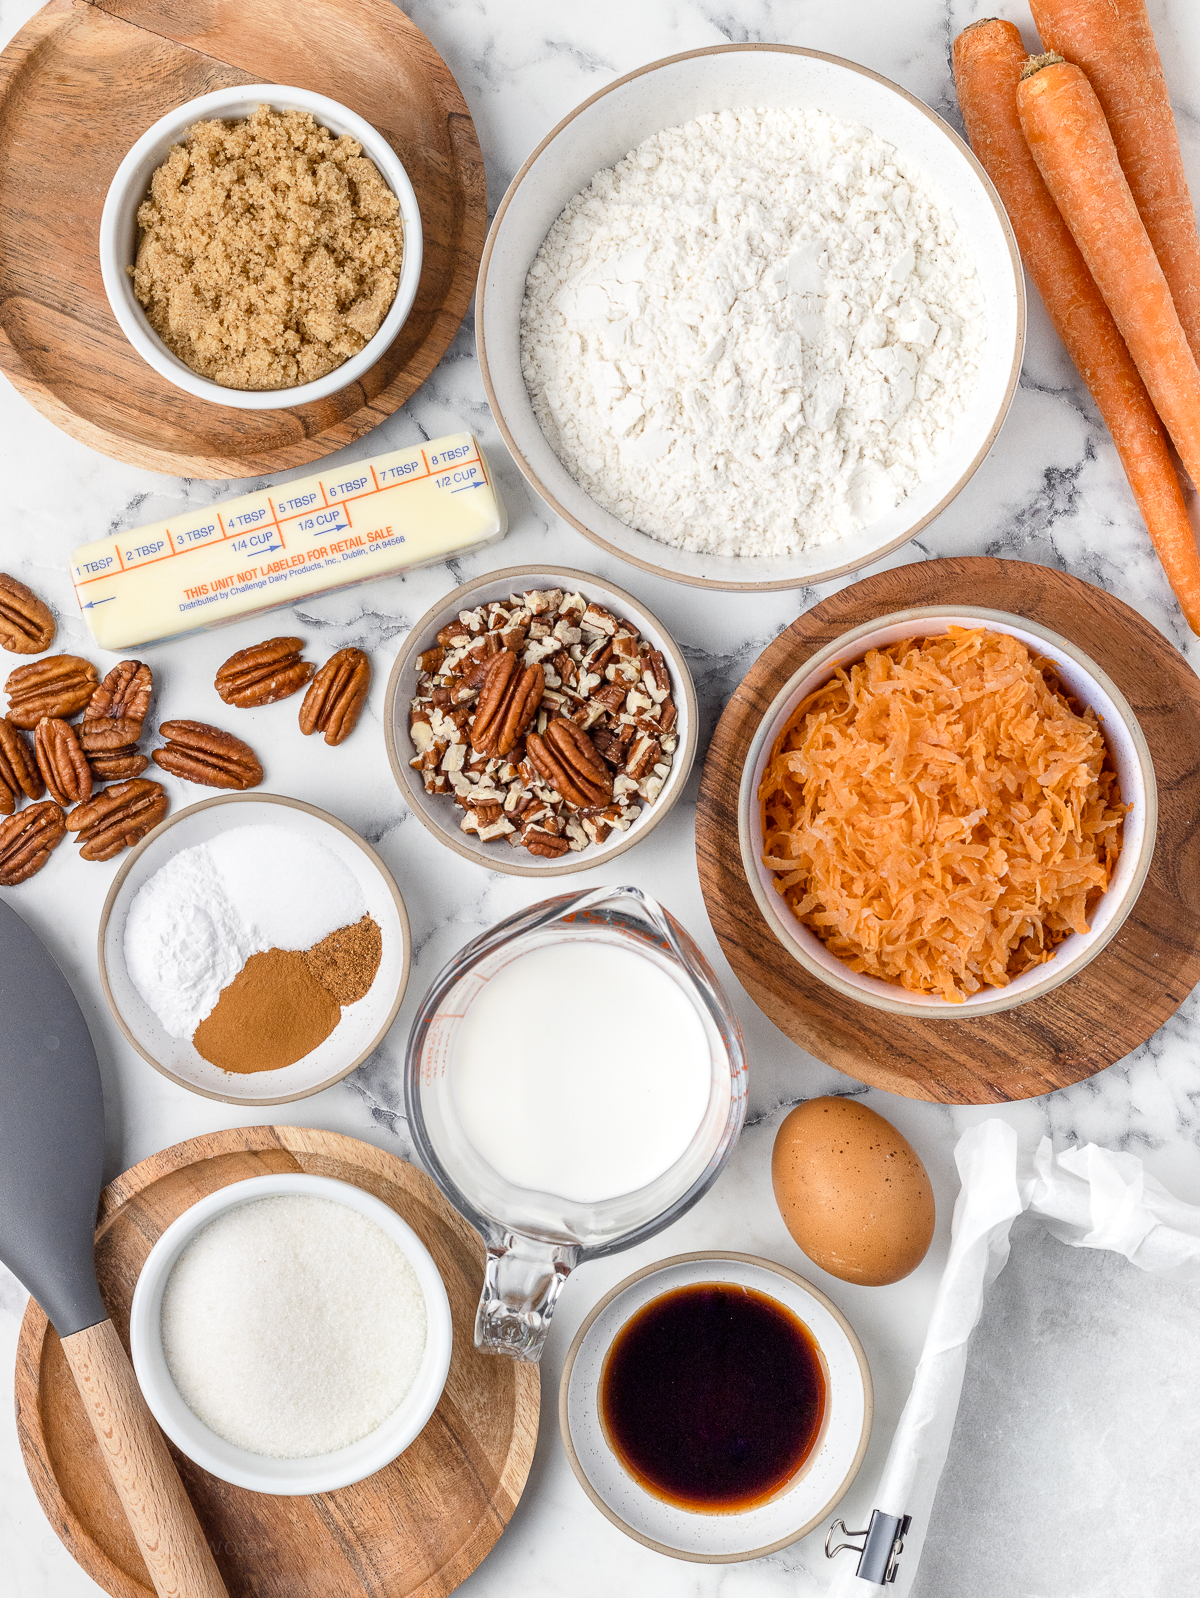 Ingredients. All purpose flour, baking powder, salt, cinnamon, nutmeg, unsalted butter, brown sugar, granulated sugar, egg, vanilla extract, buttermilk, shredded carrots, and toasted pecans.